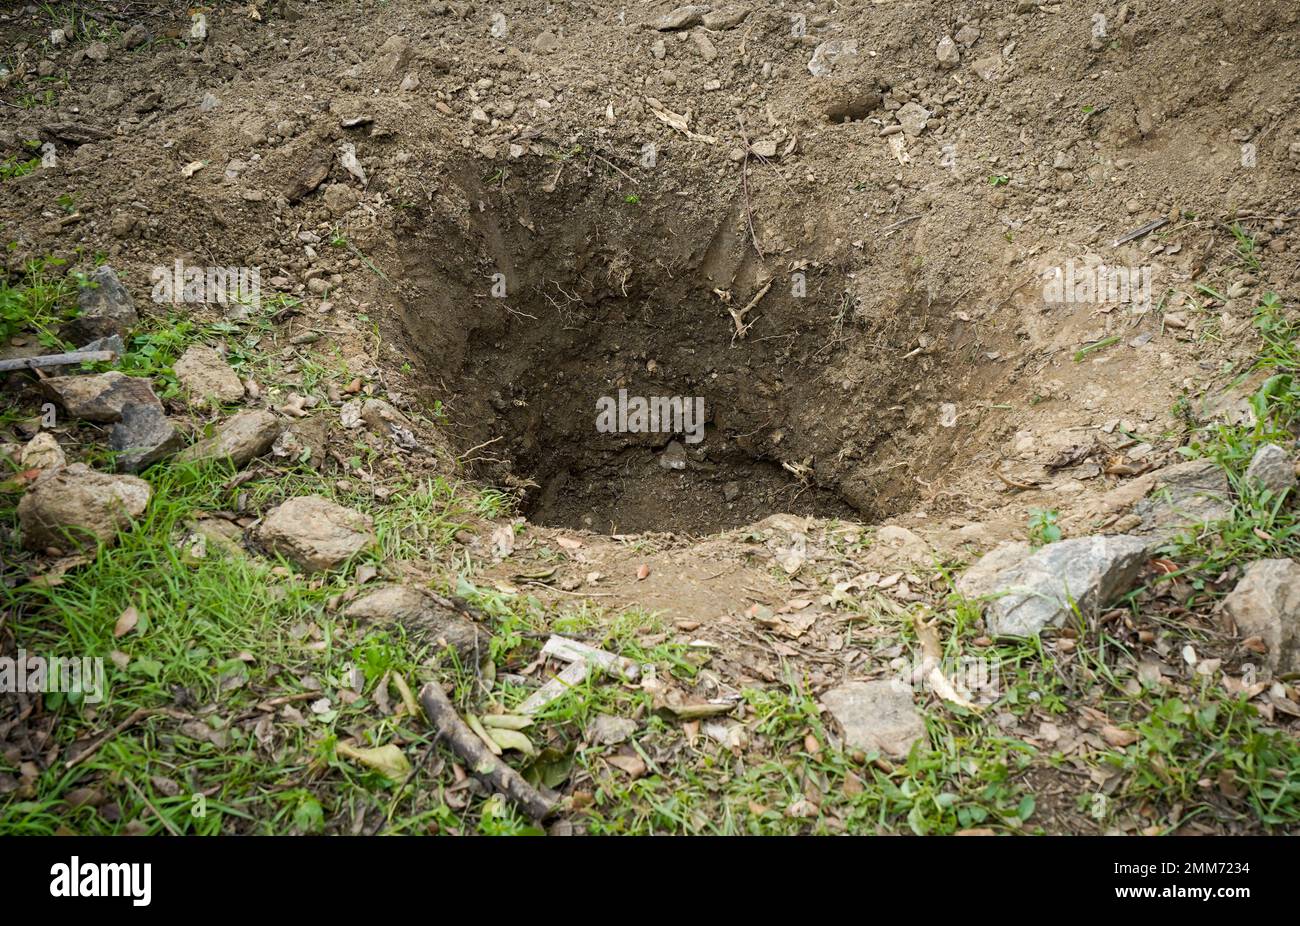 Deep hole in the ground in a garden. Stock Photo